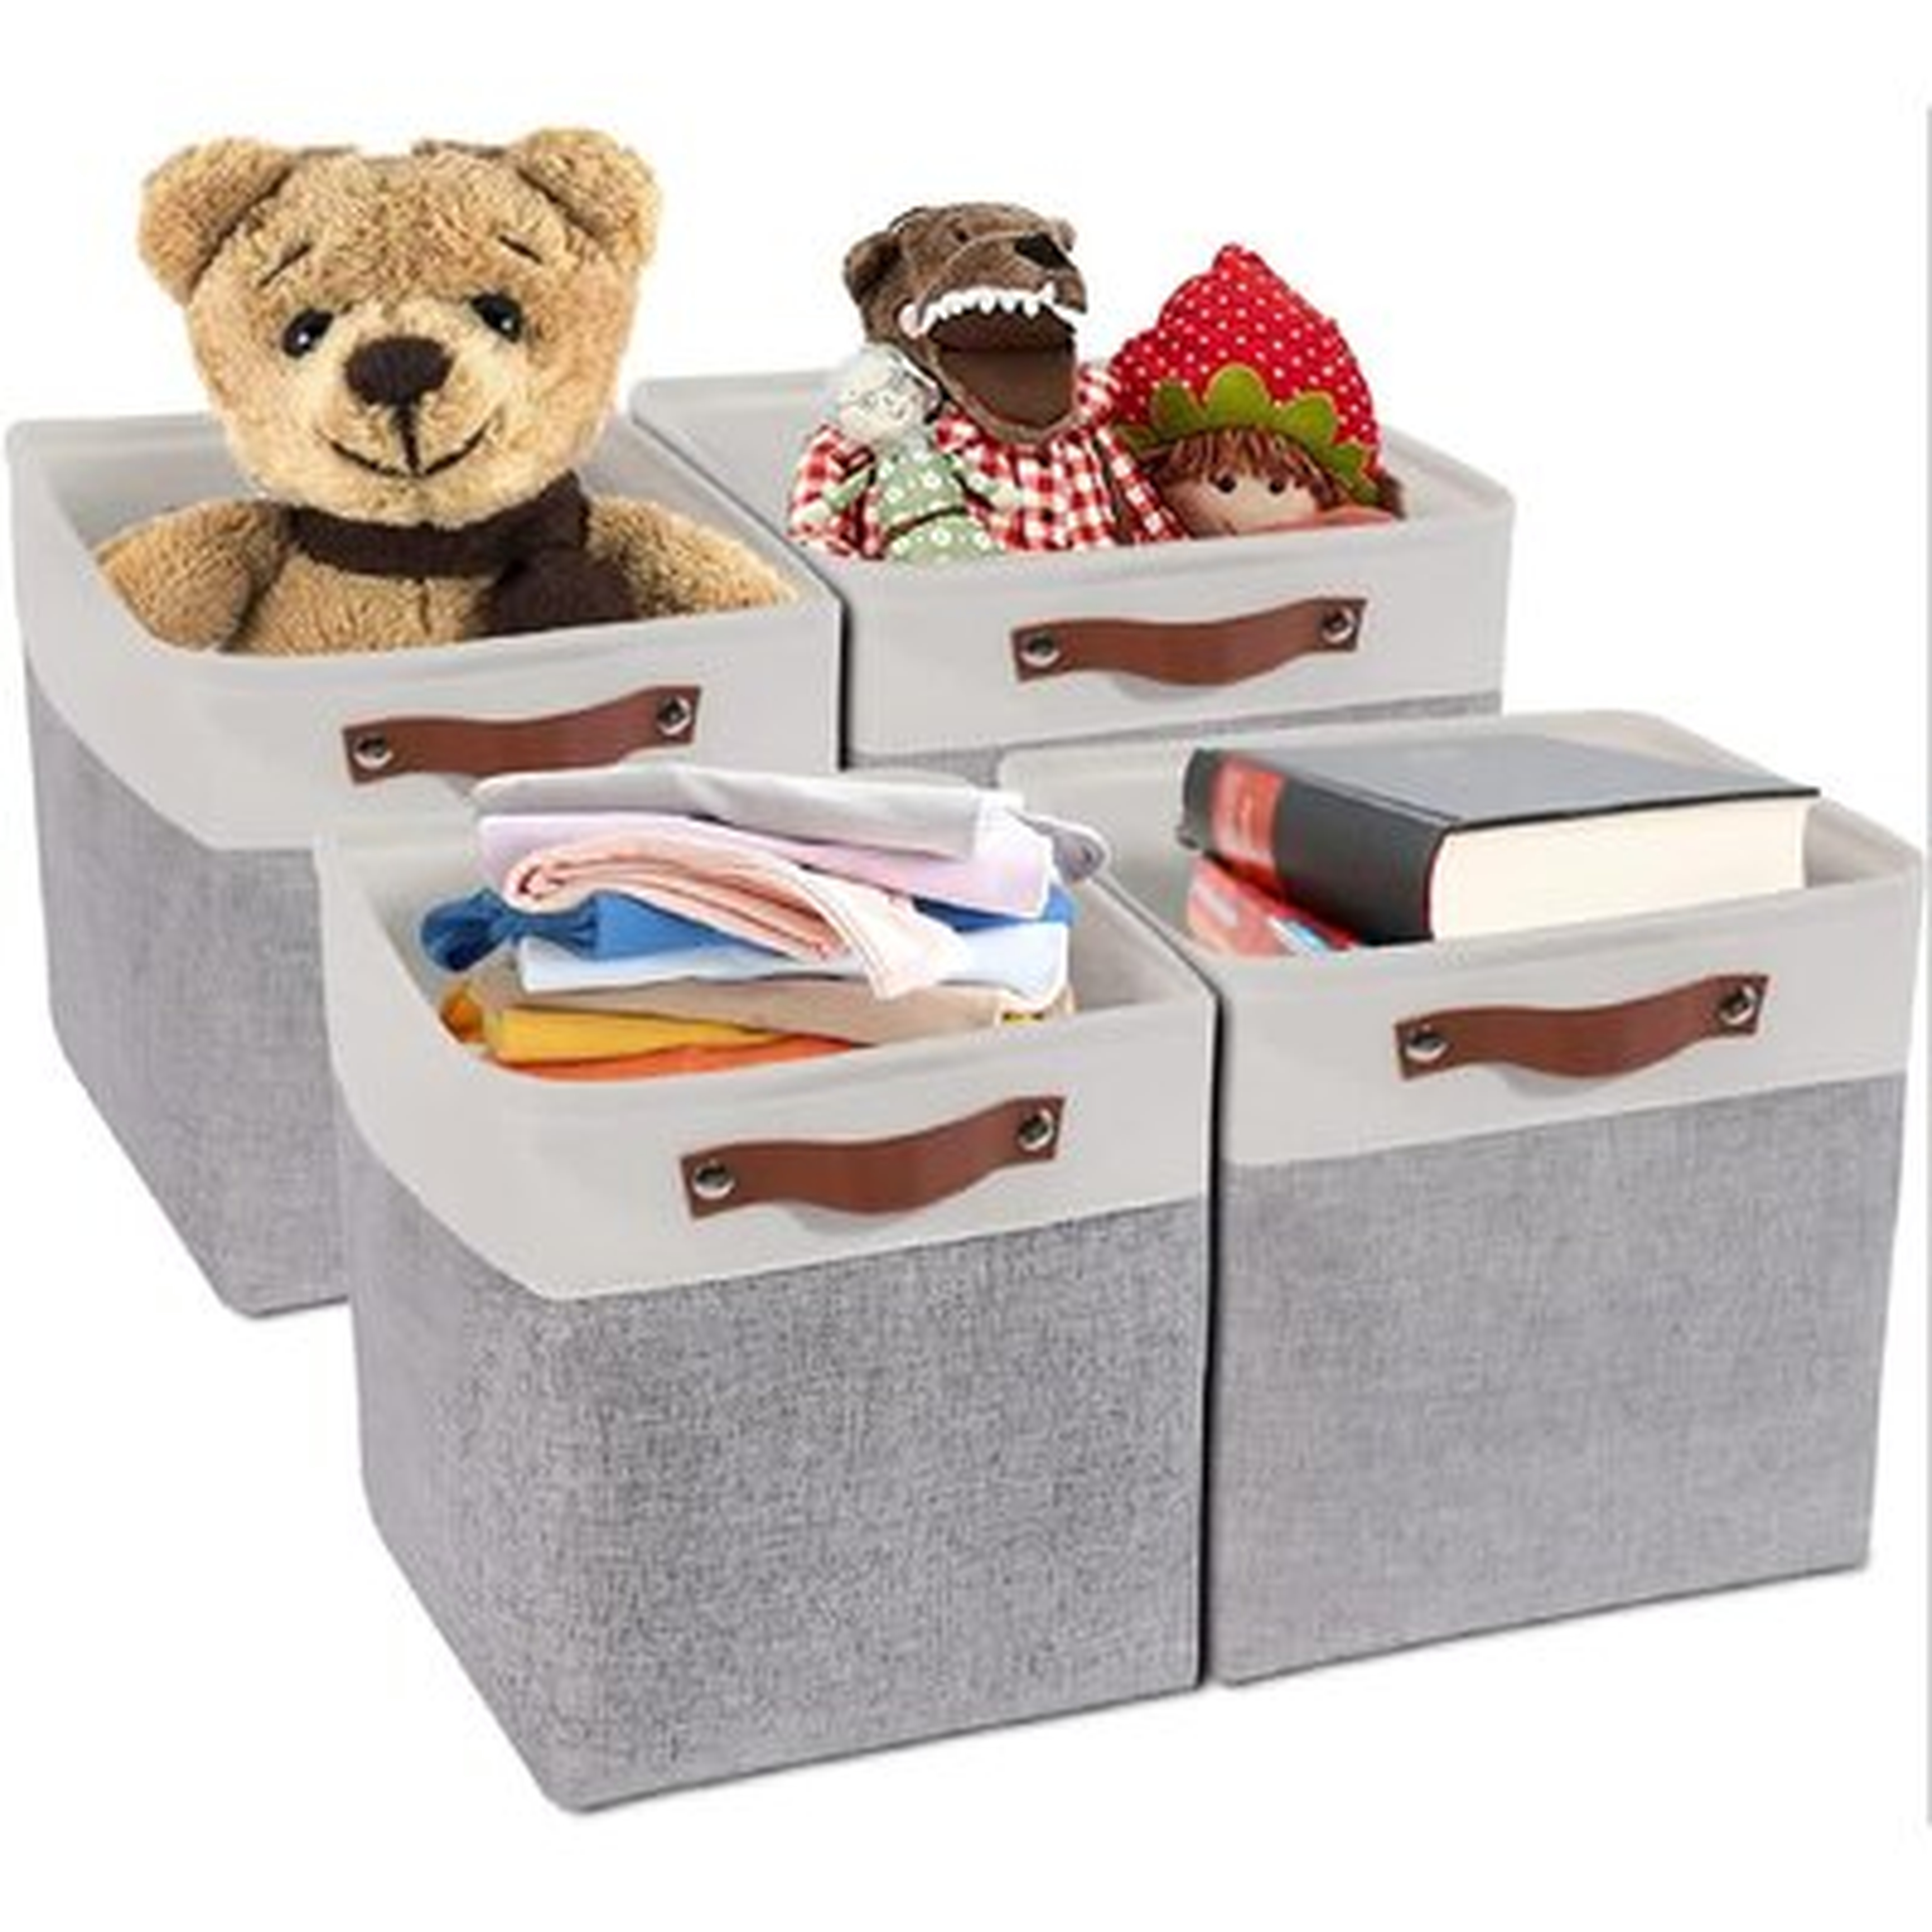 4 Pack Foldable Storage Basket Bins 12X12x12 Inches Baskets Storage Box Cubes Containers With Handles Shelves Closet Nursery Storage Baskets For Clothes Storage Toys, Books, Home, Office White&Grey - Wayfair